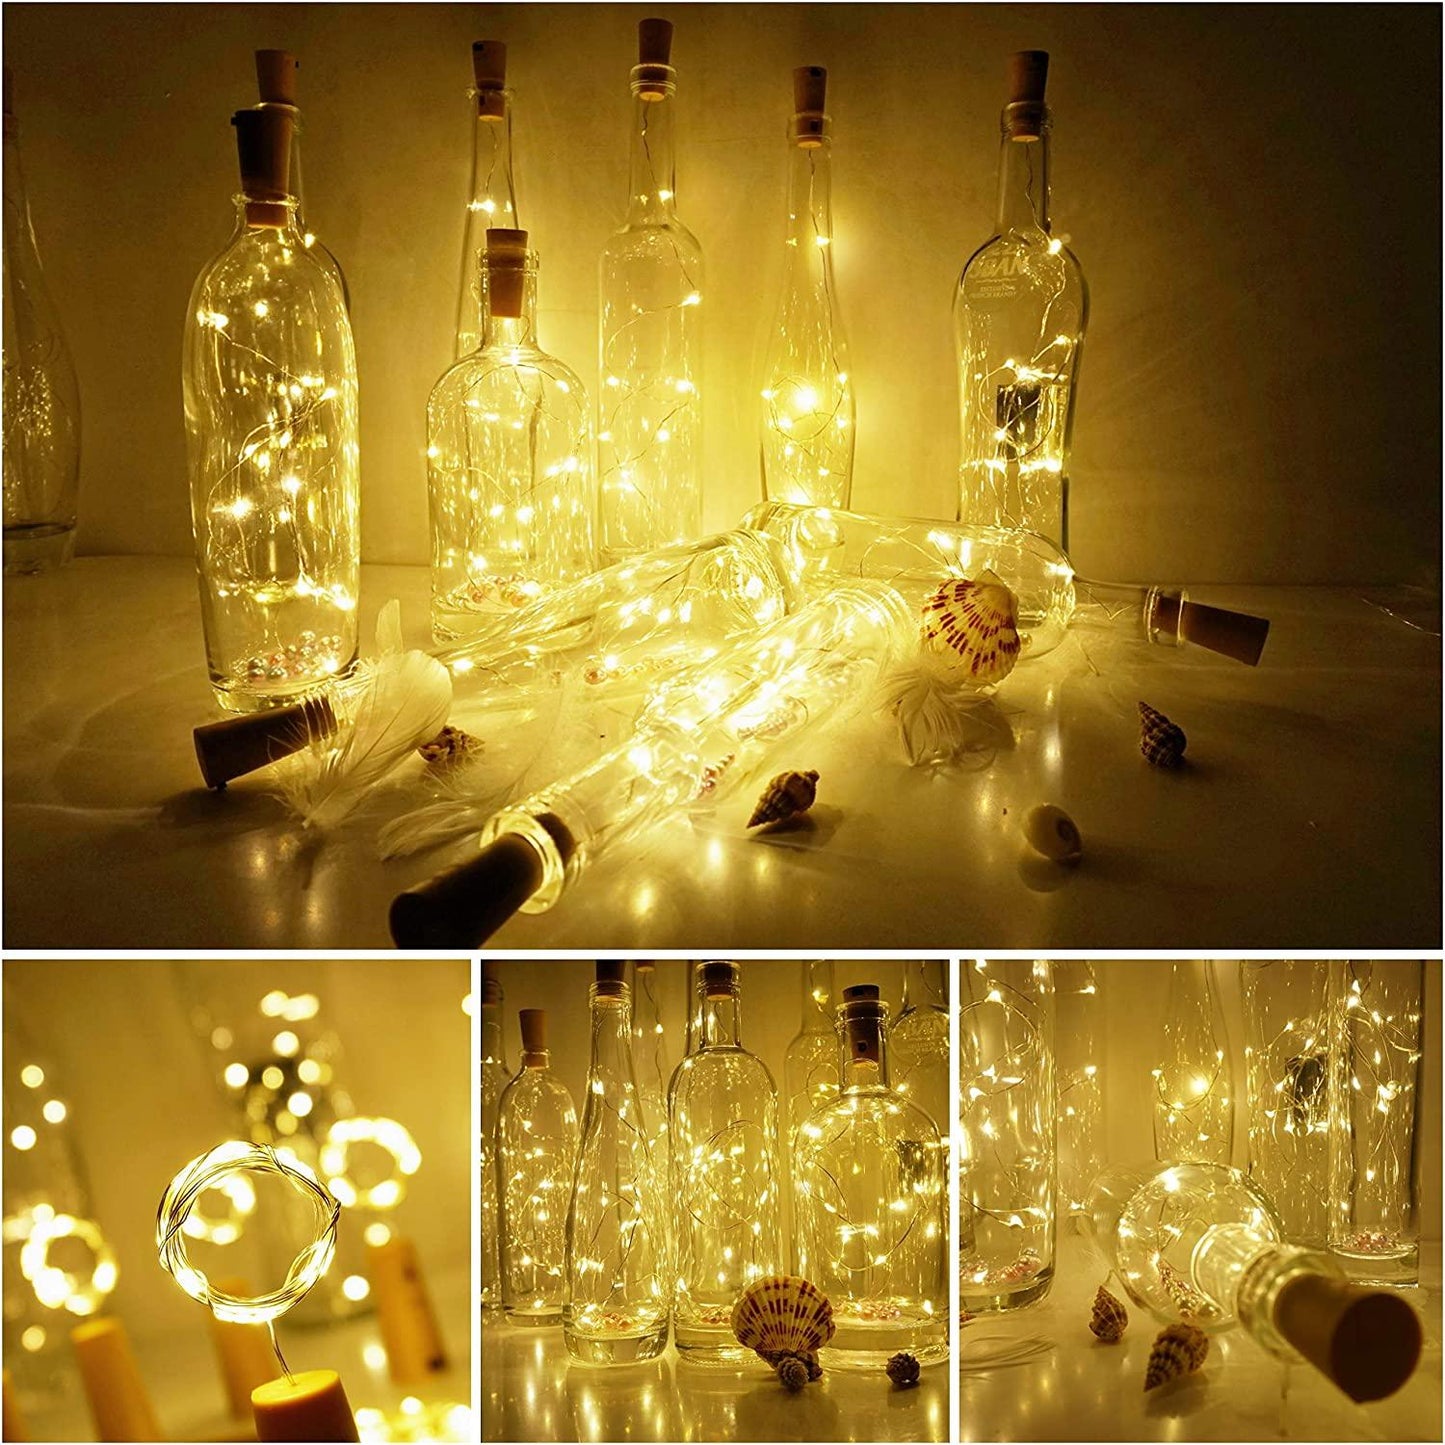 DIY String Light Ornaments for Tables - If you say i do